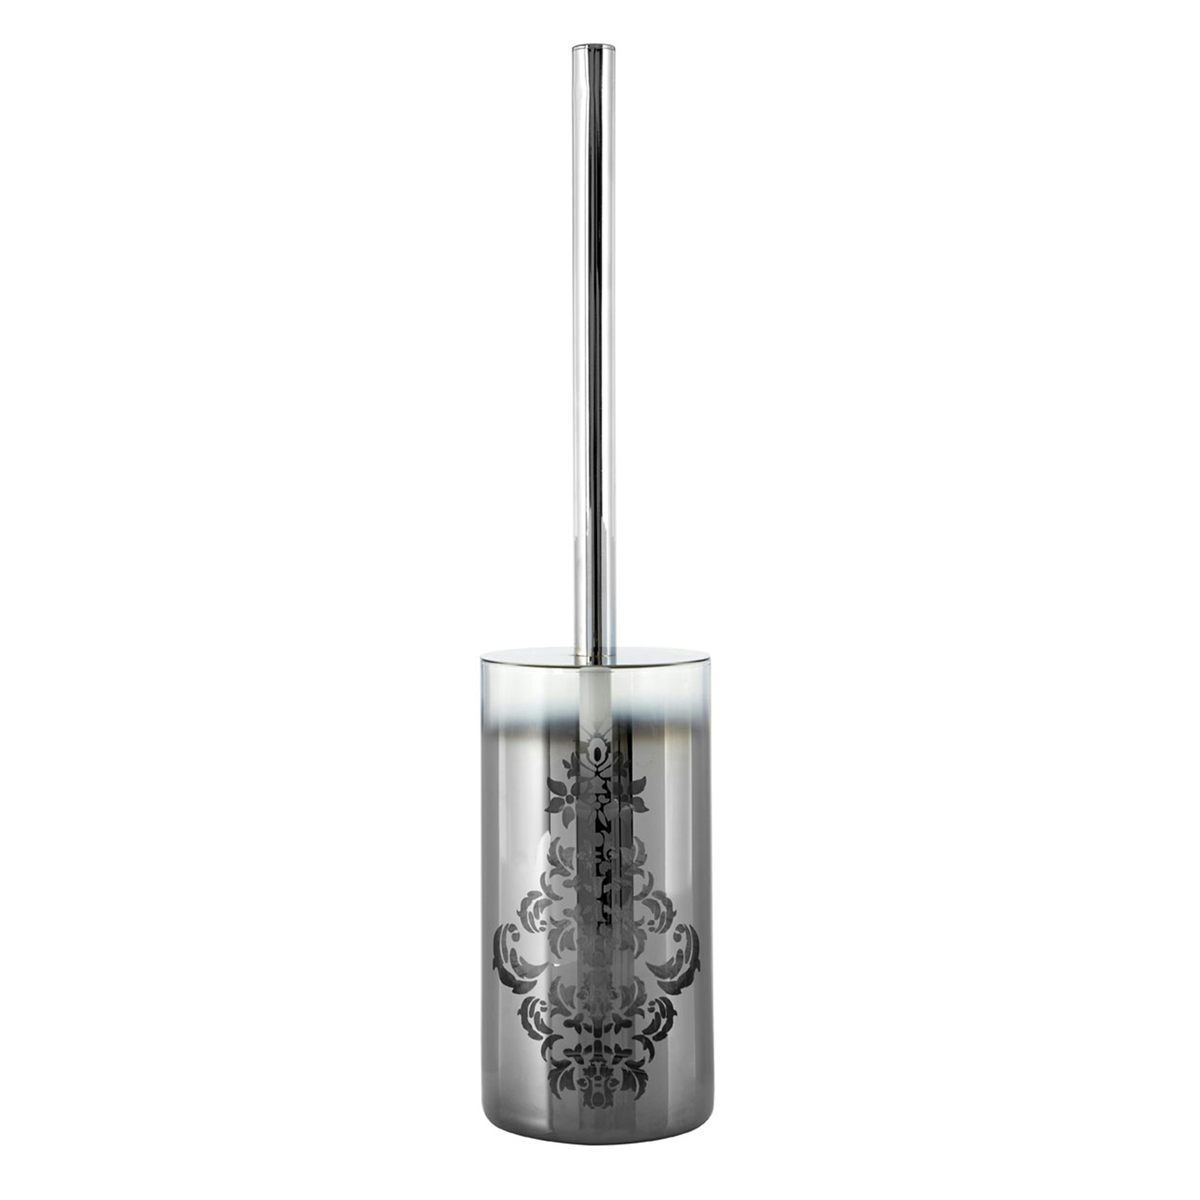 Accents Elissa glass silver toilet brush holder